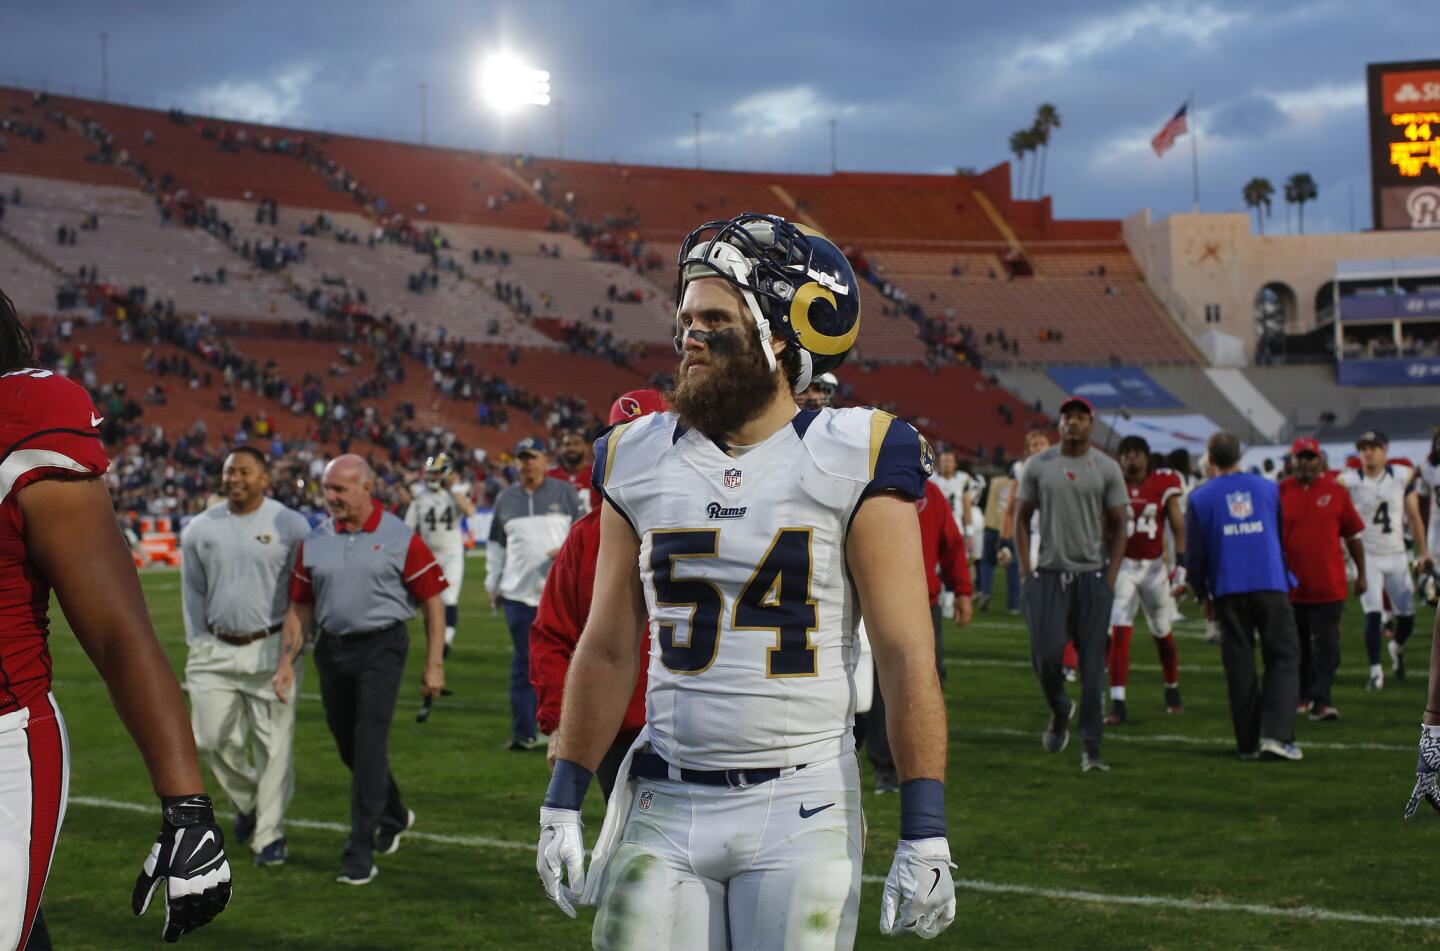 Rams linebacker Bryce Hager (54) leaves the Coliseum field after the last game of the season, a 44-6 loss to the Cardinals.